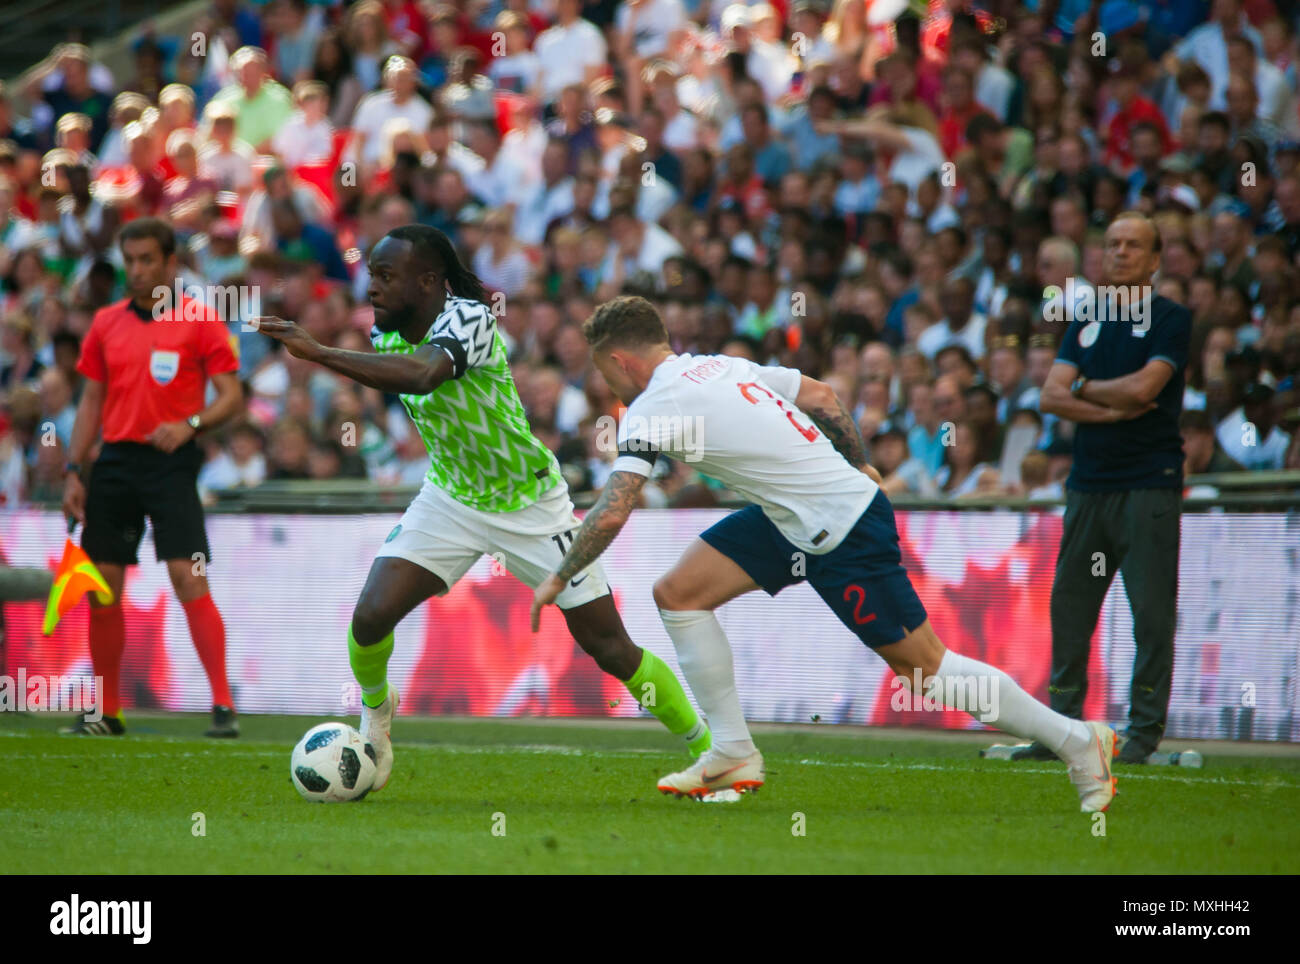 Wembley, United Kingdom. 2nd June 2018. ENGLAND took on Nigeria as they prepare for the World Cup this summer. England won the game 2 - 1. Stock Photo